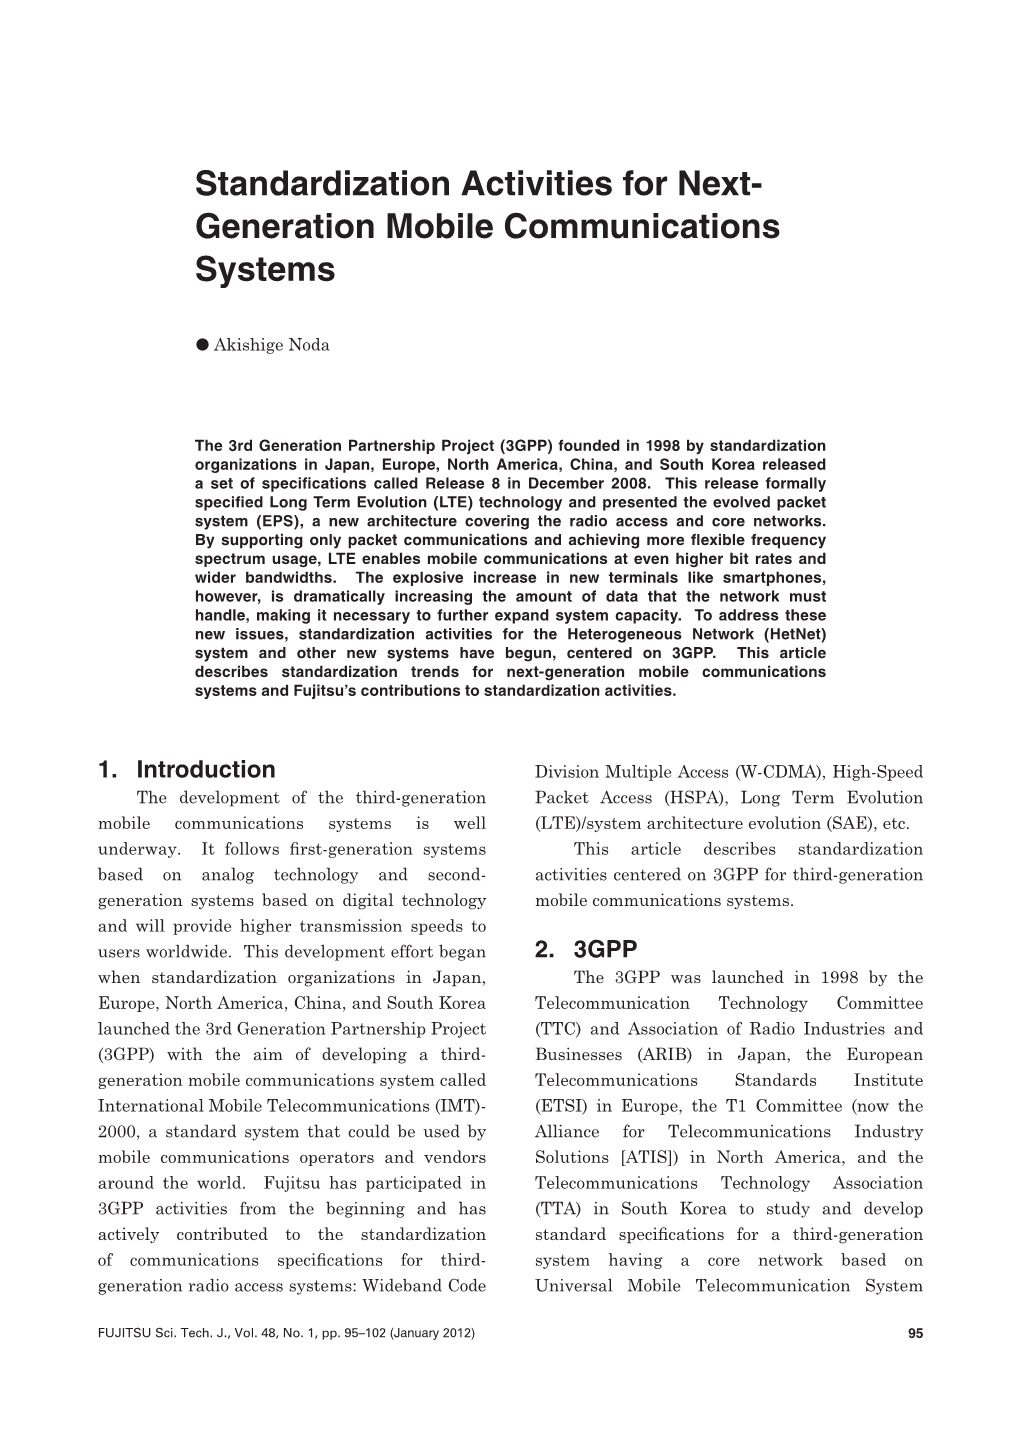 Standardization Activities for Next-Generation Mobile Communications Systems